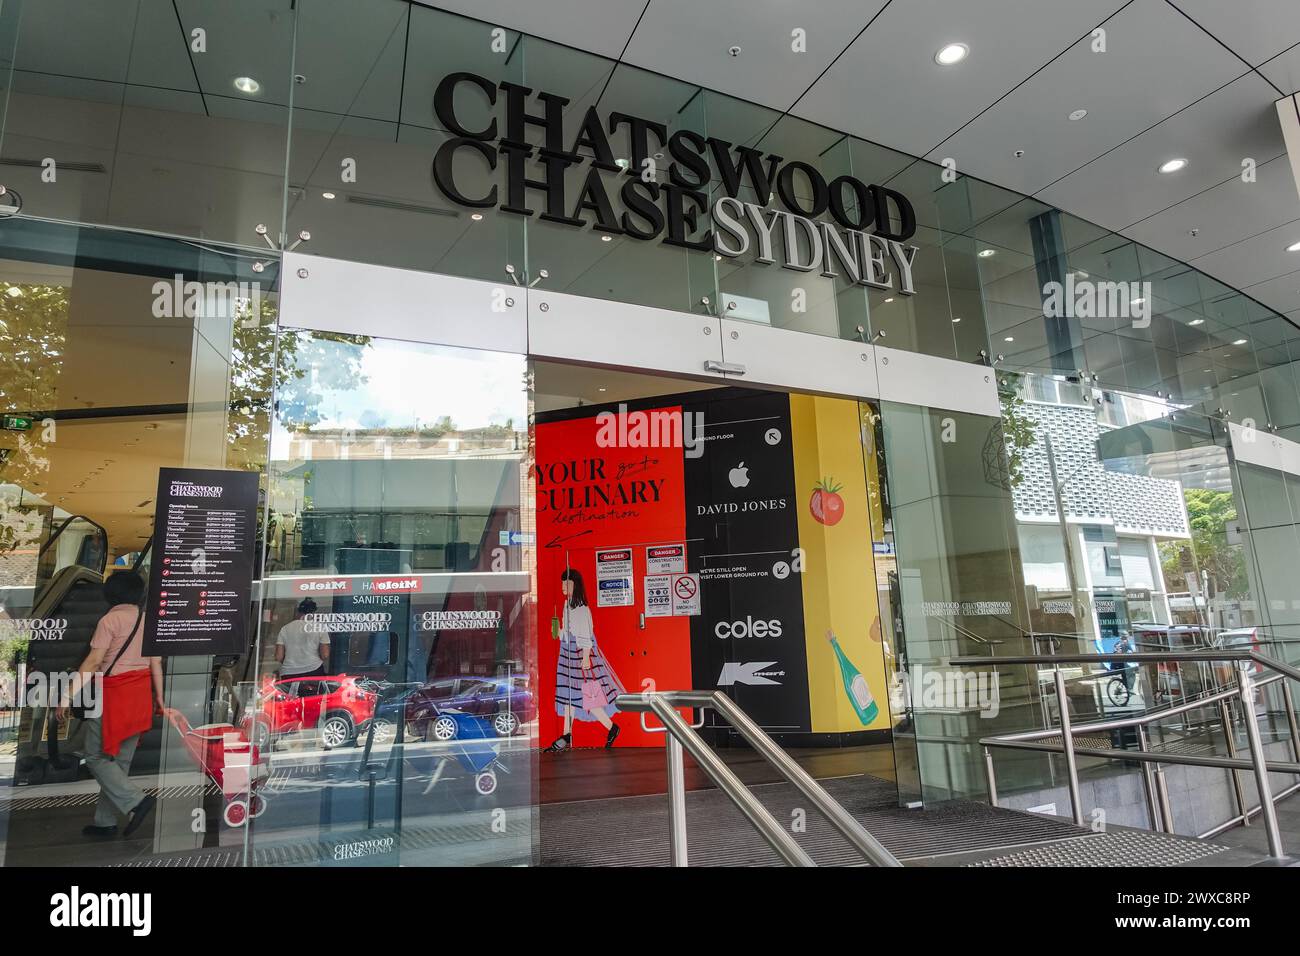 Chatswood Chase Sydney is a shopping centre in the suburb of Chatswood on the Lower North Shore of Sydney, New South Wales, Australia Stock Photo